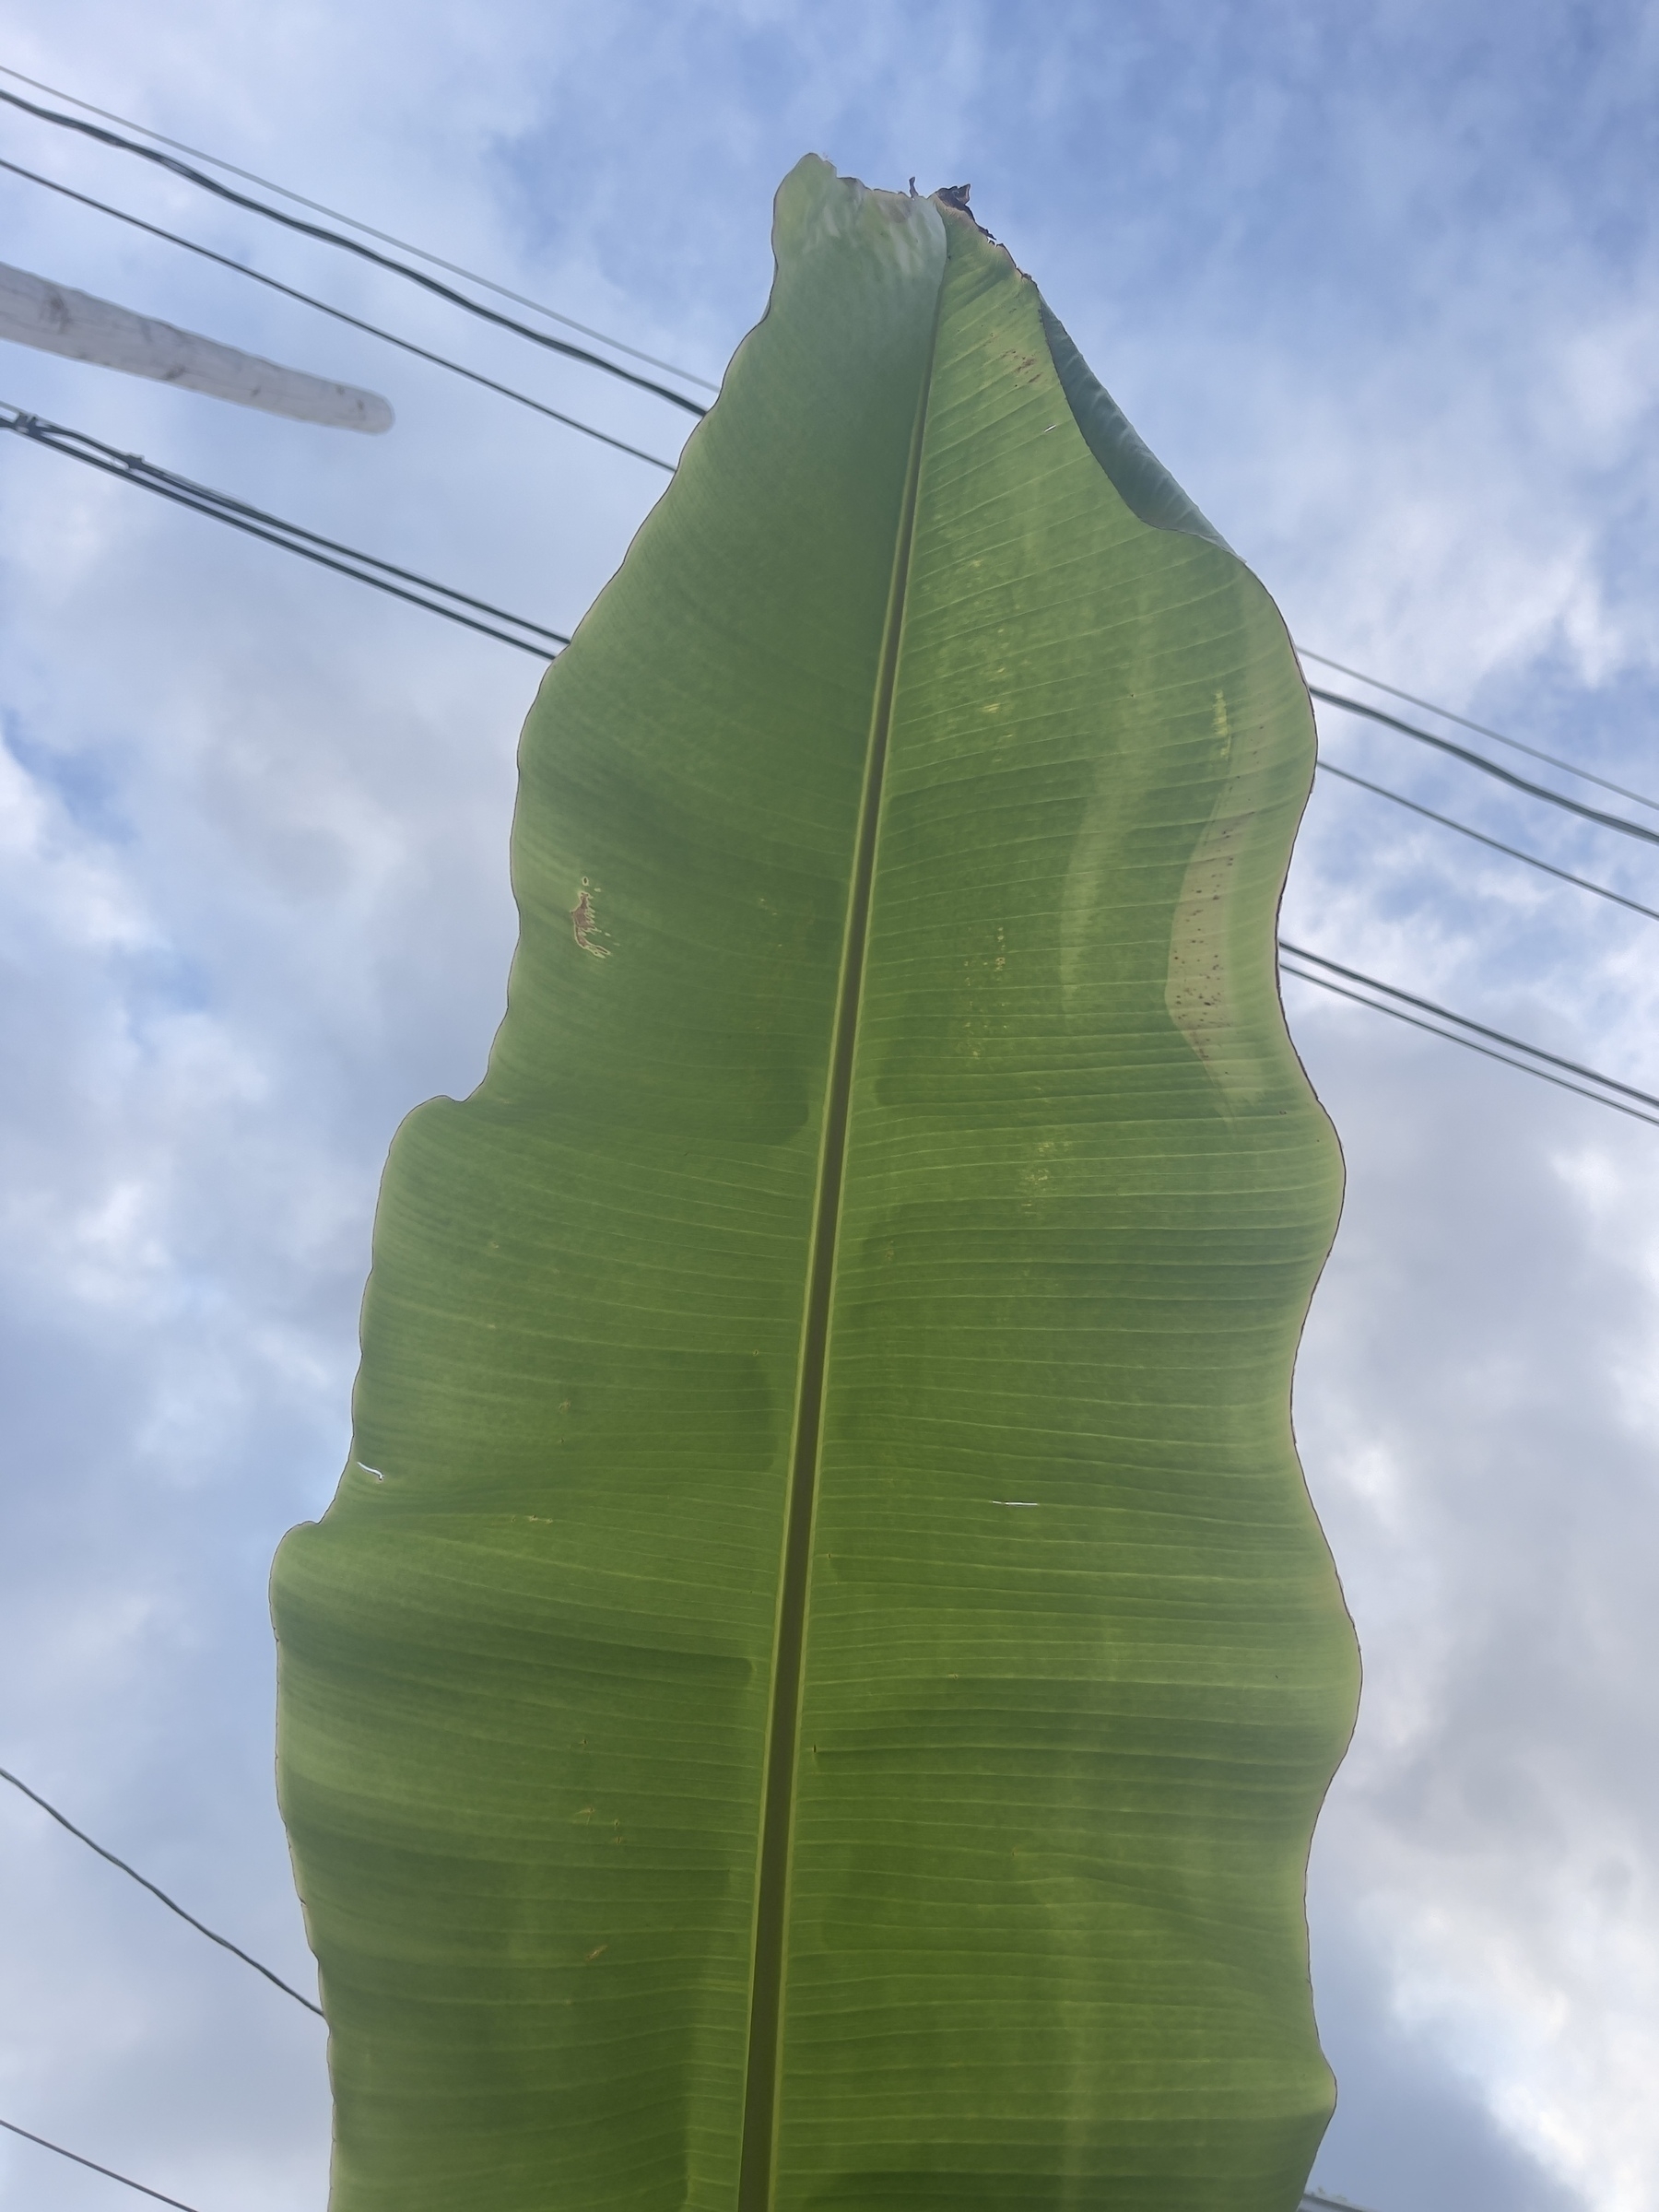 Large tropical plant leaf against the sky.